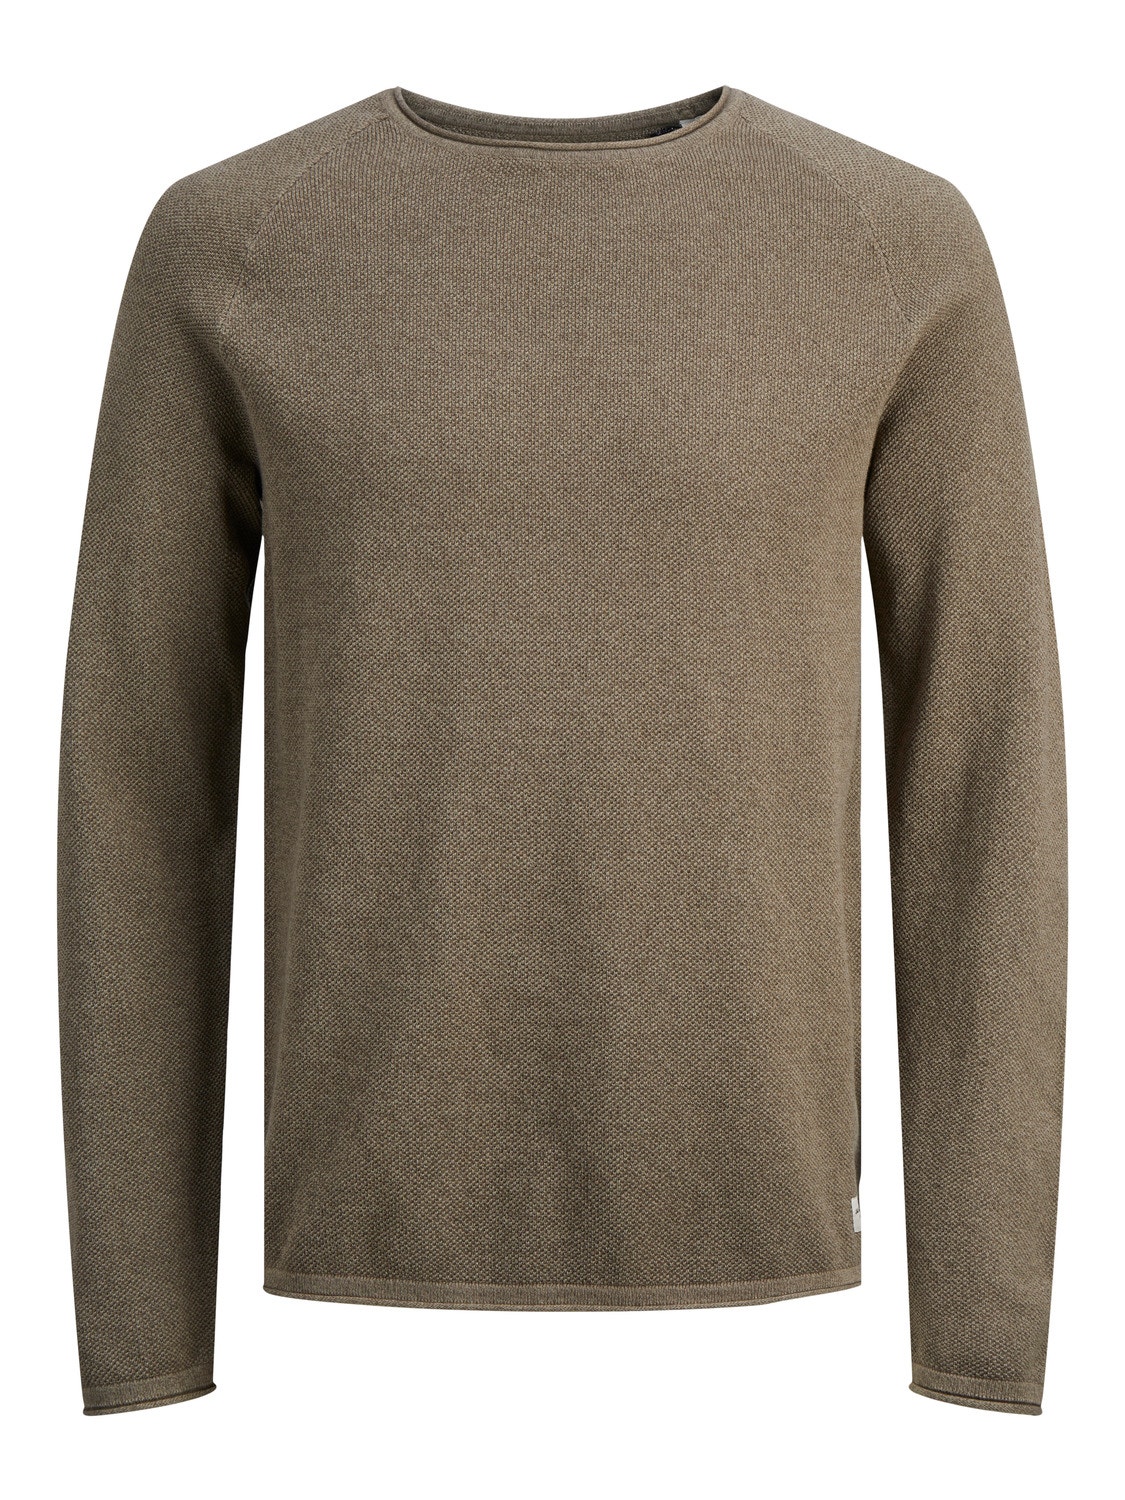 Jack & Jones Plain Knitted pullover -Bungee Cord - 12157321